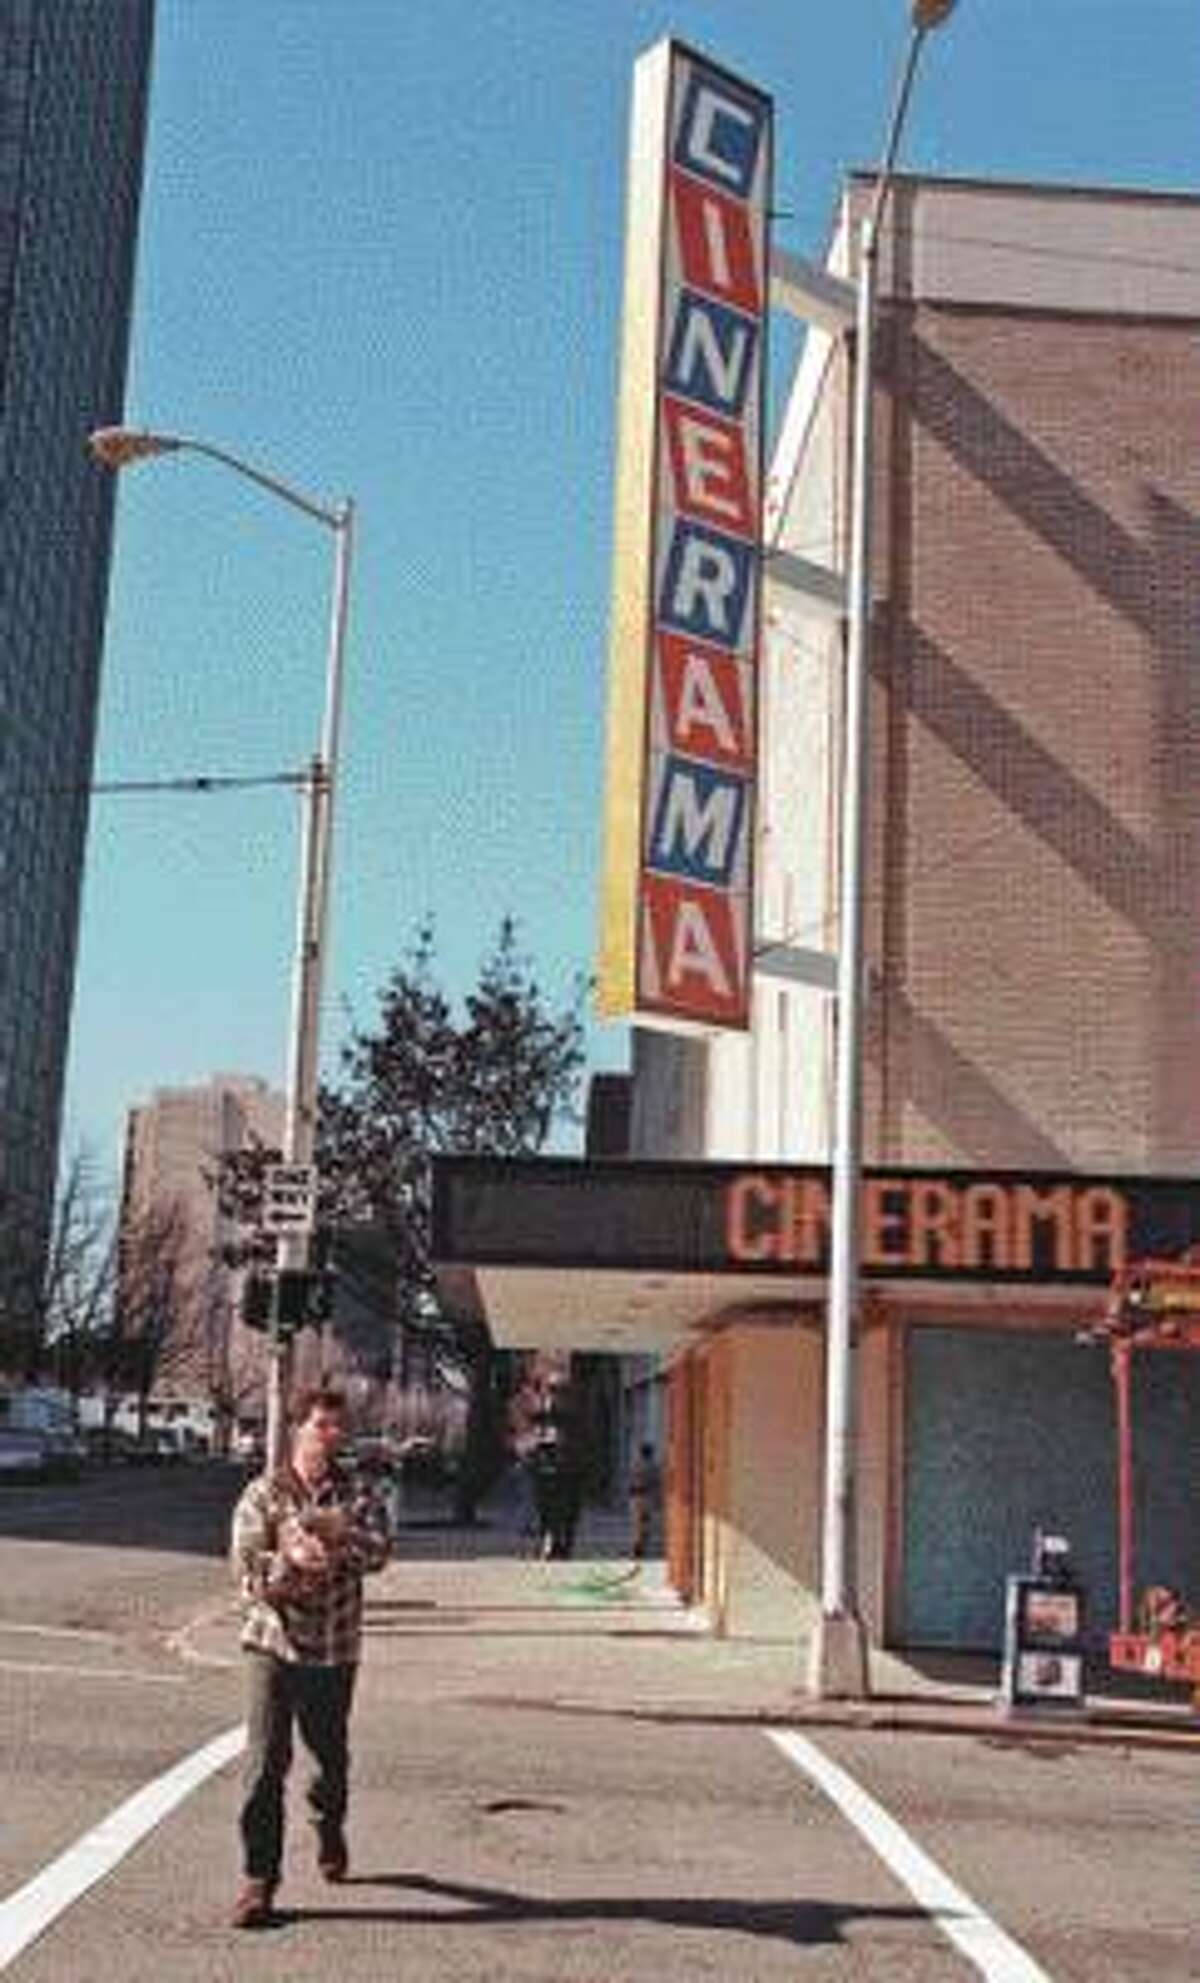 Microsoft big shot Paul Allen used a bit of his dough to purchase Seattle's endangered Cinerama Theatre. He spruced up the theater of his childhood as a "gift to the city."